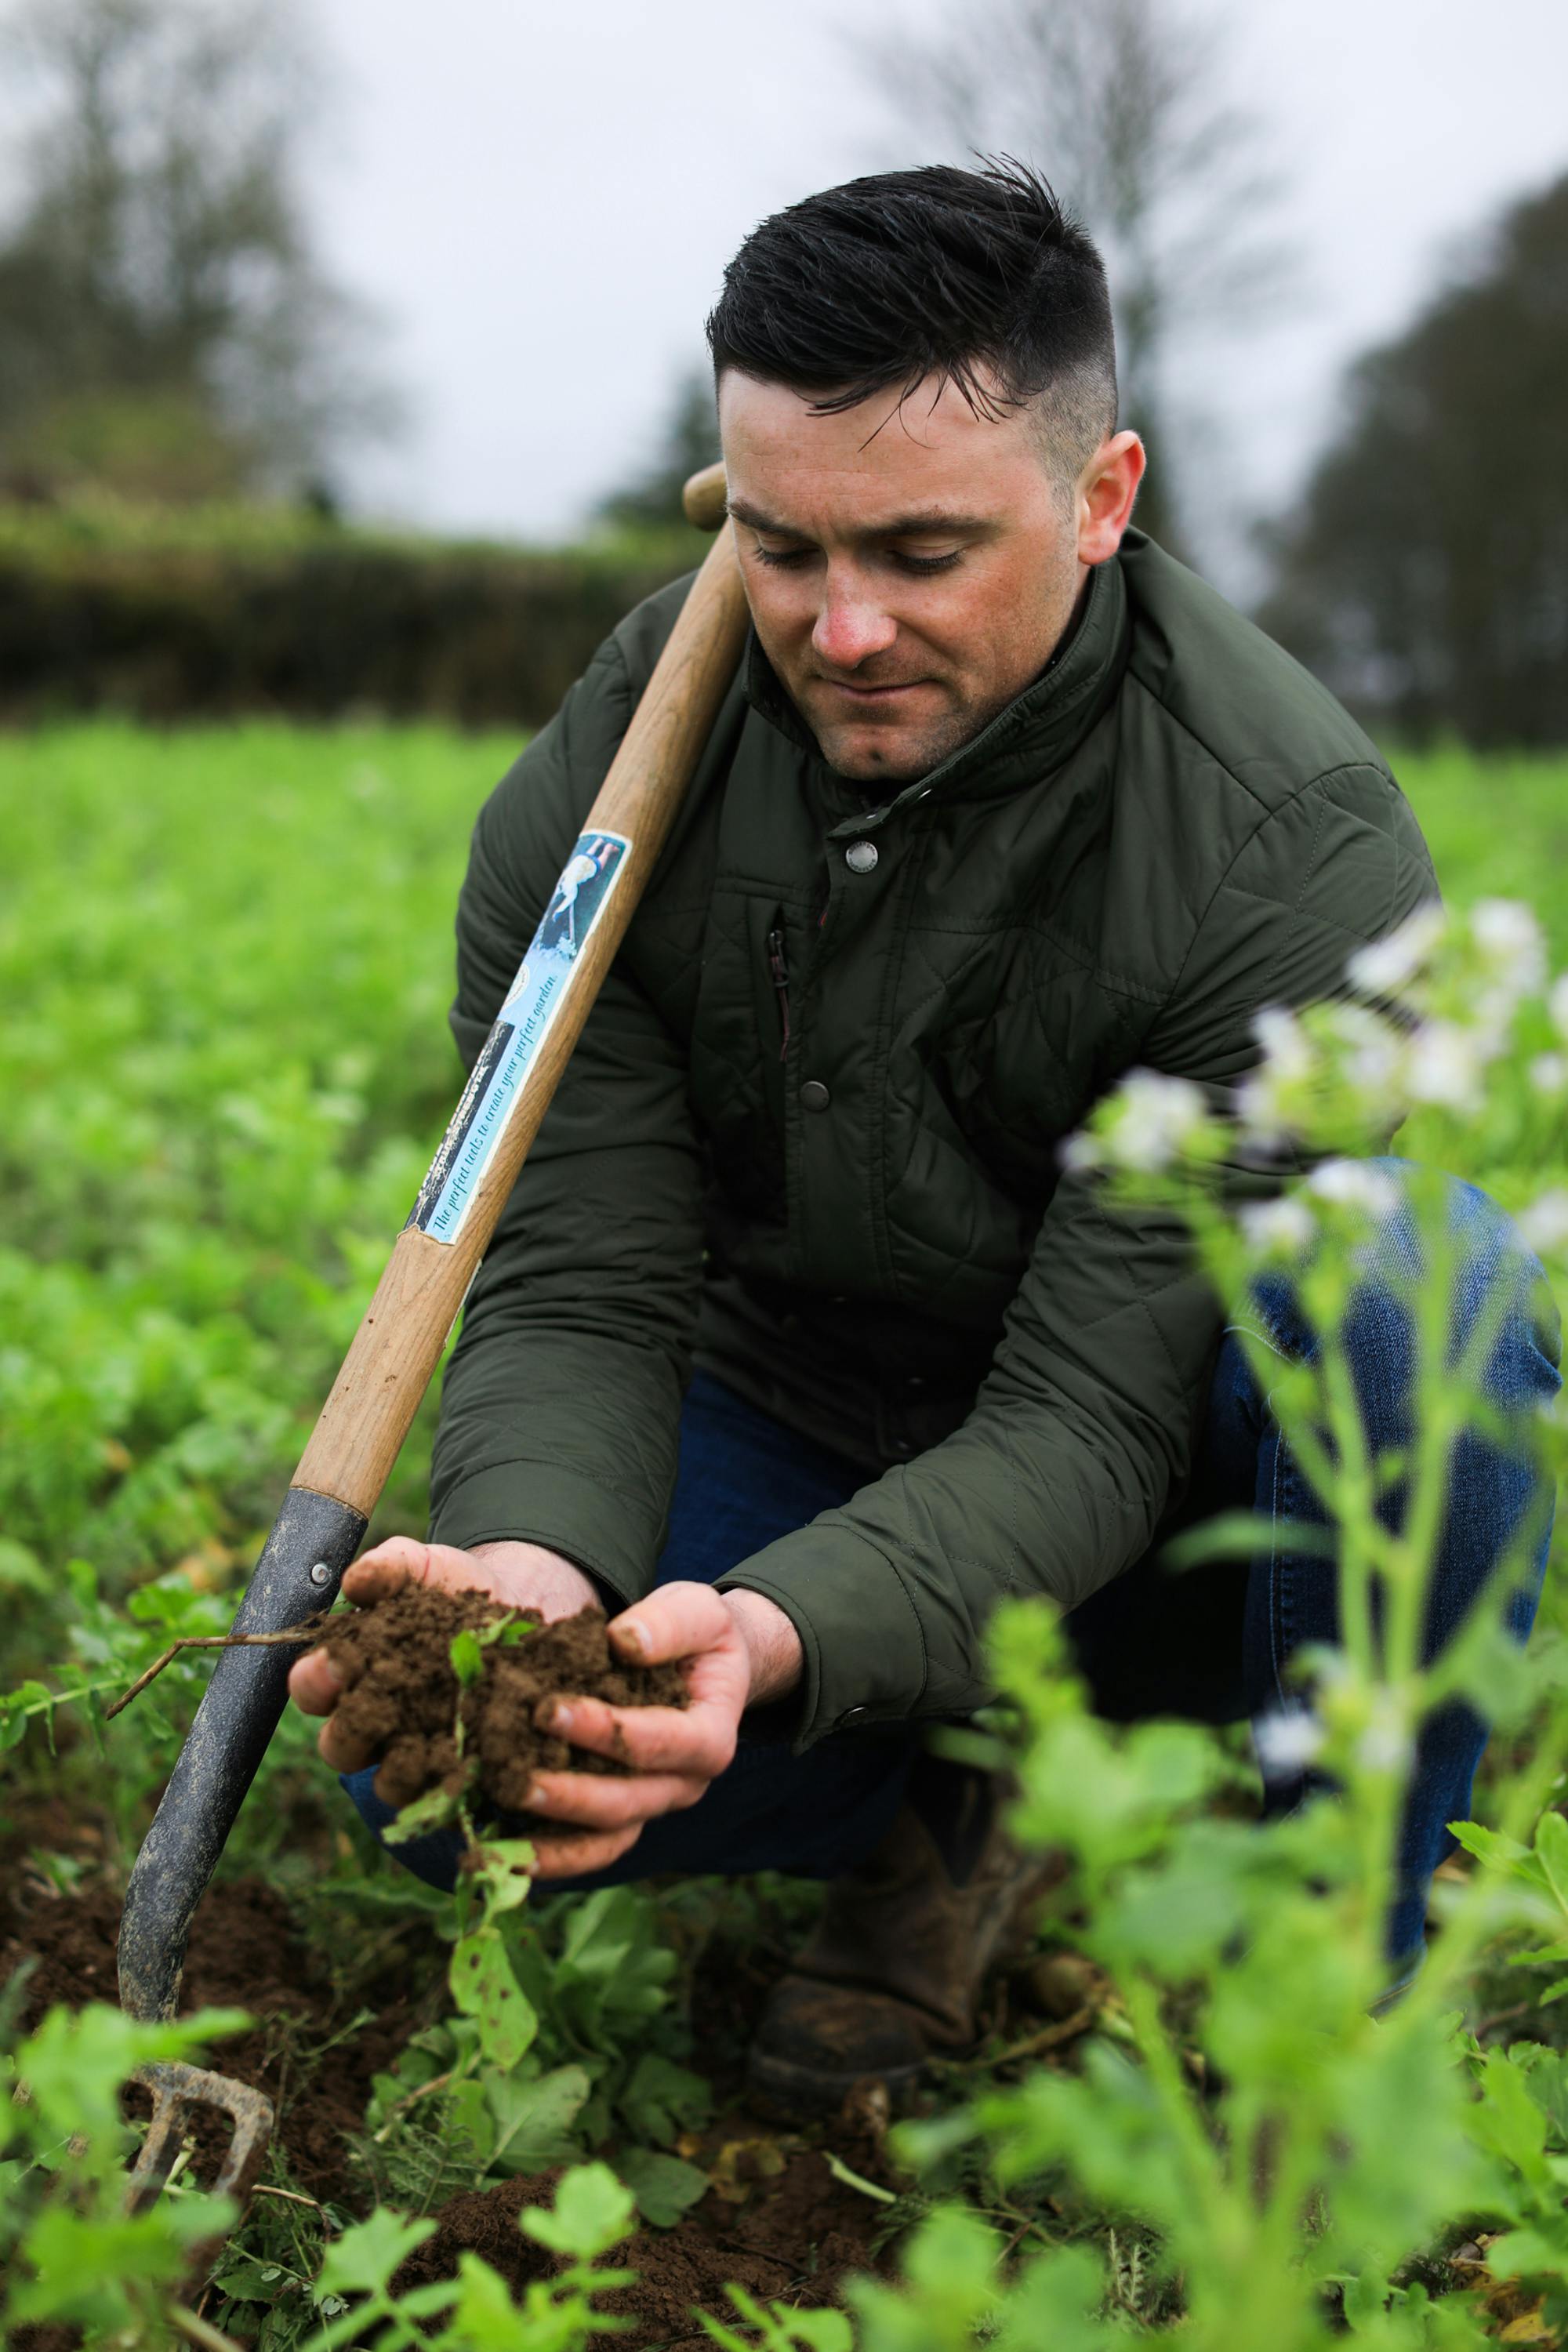 Walter Furlong Junior of the Guinness regenerative agriculture programme picking up a soil sample